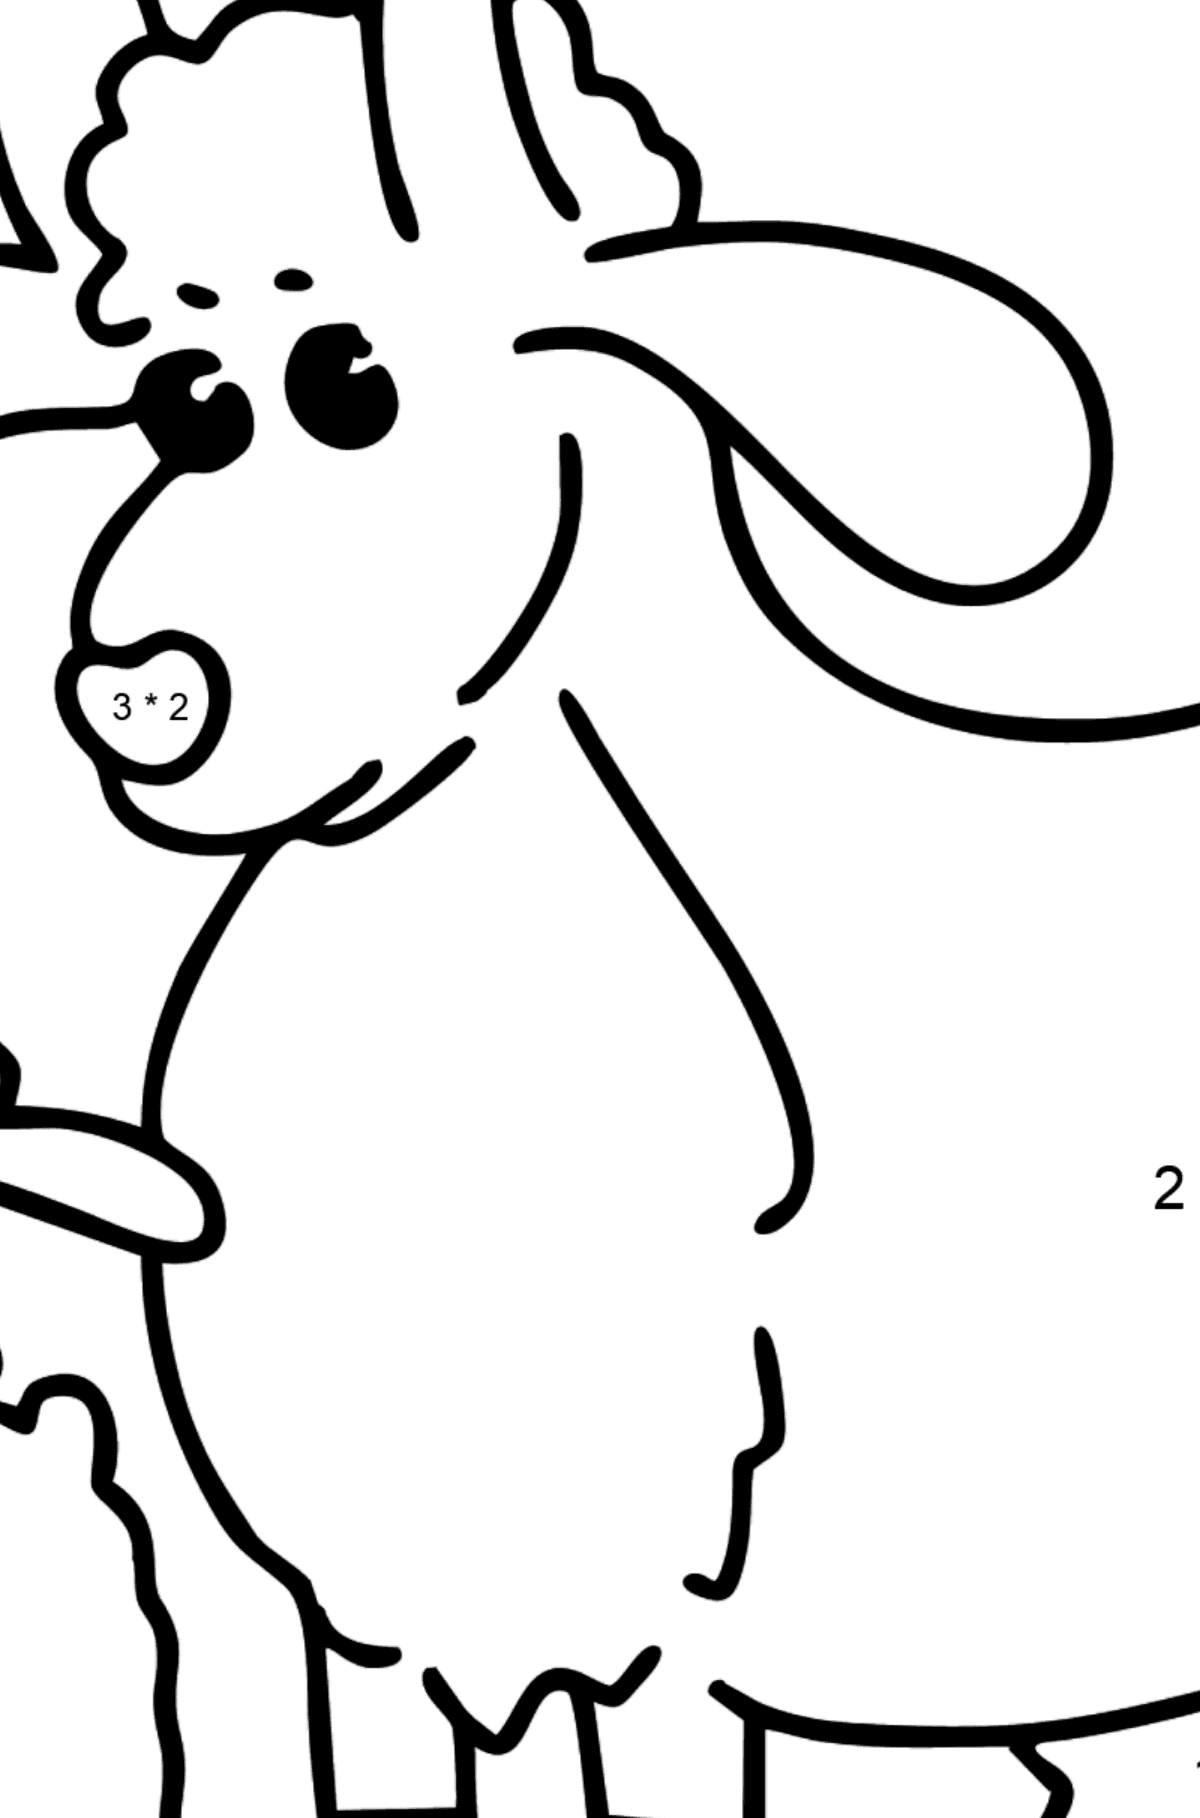 Goat and Kid coloring page - Math Coloring - Multiplication for Kids